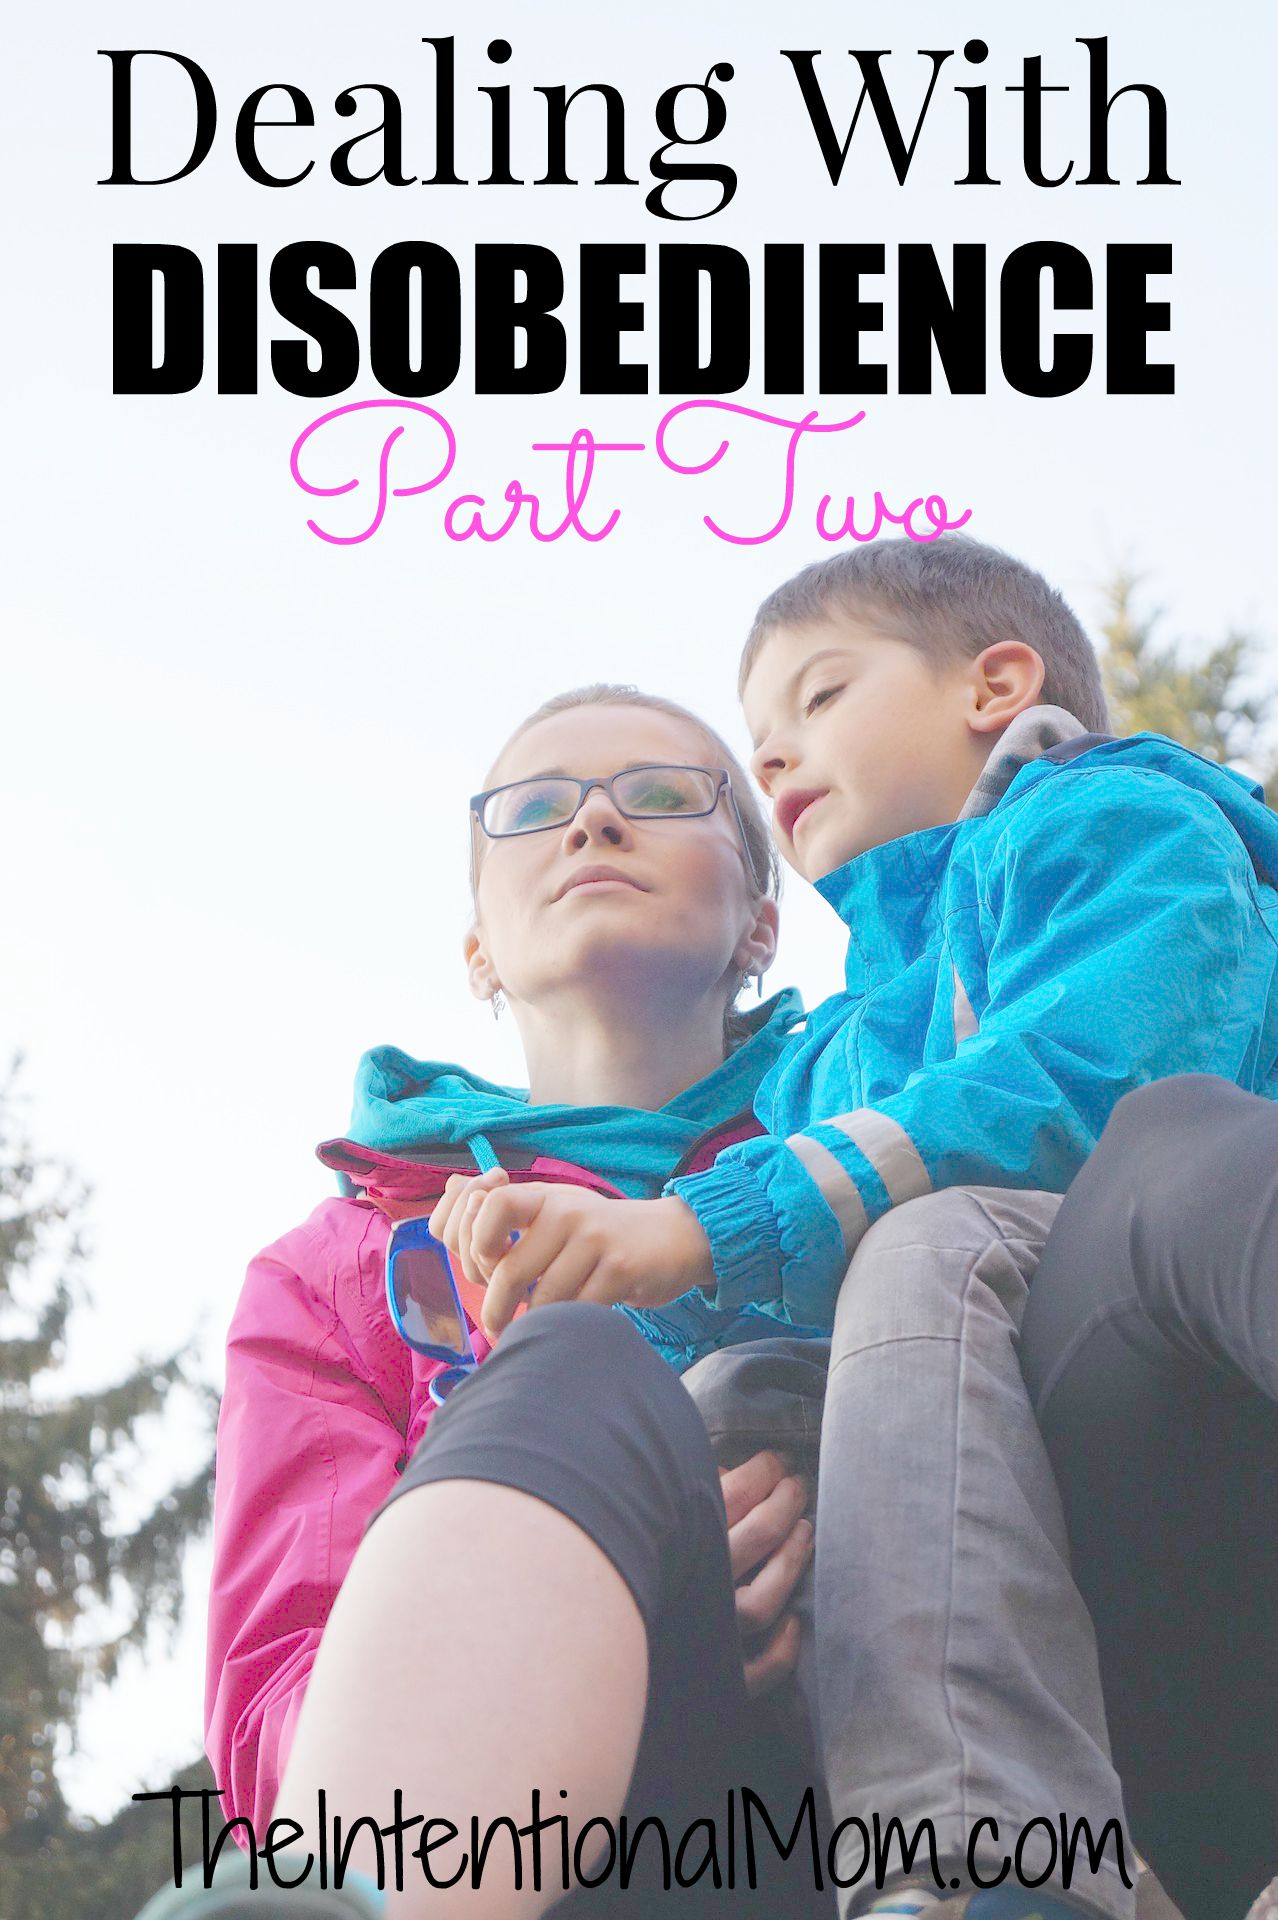 Dealing with Disobedience (Part Two)